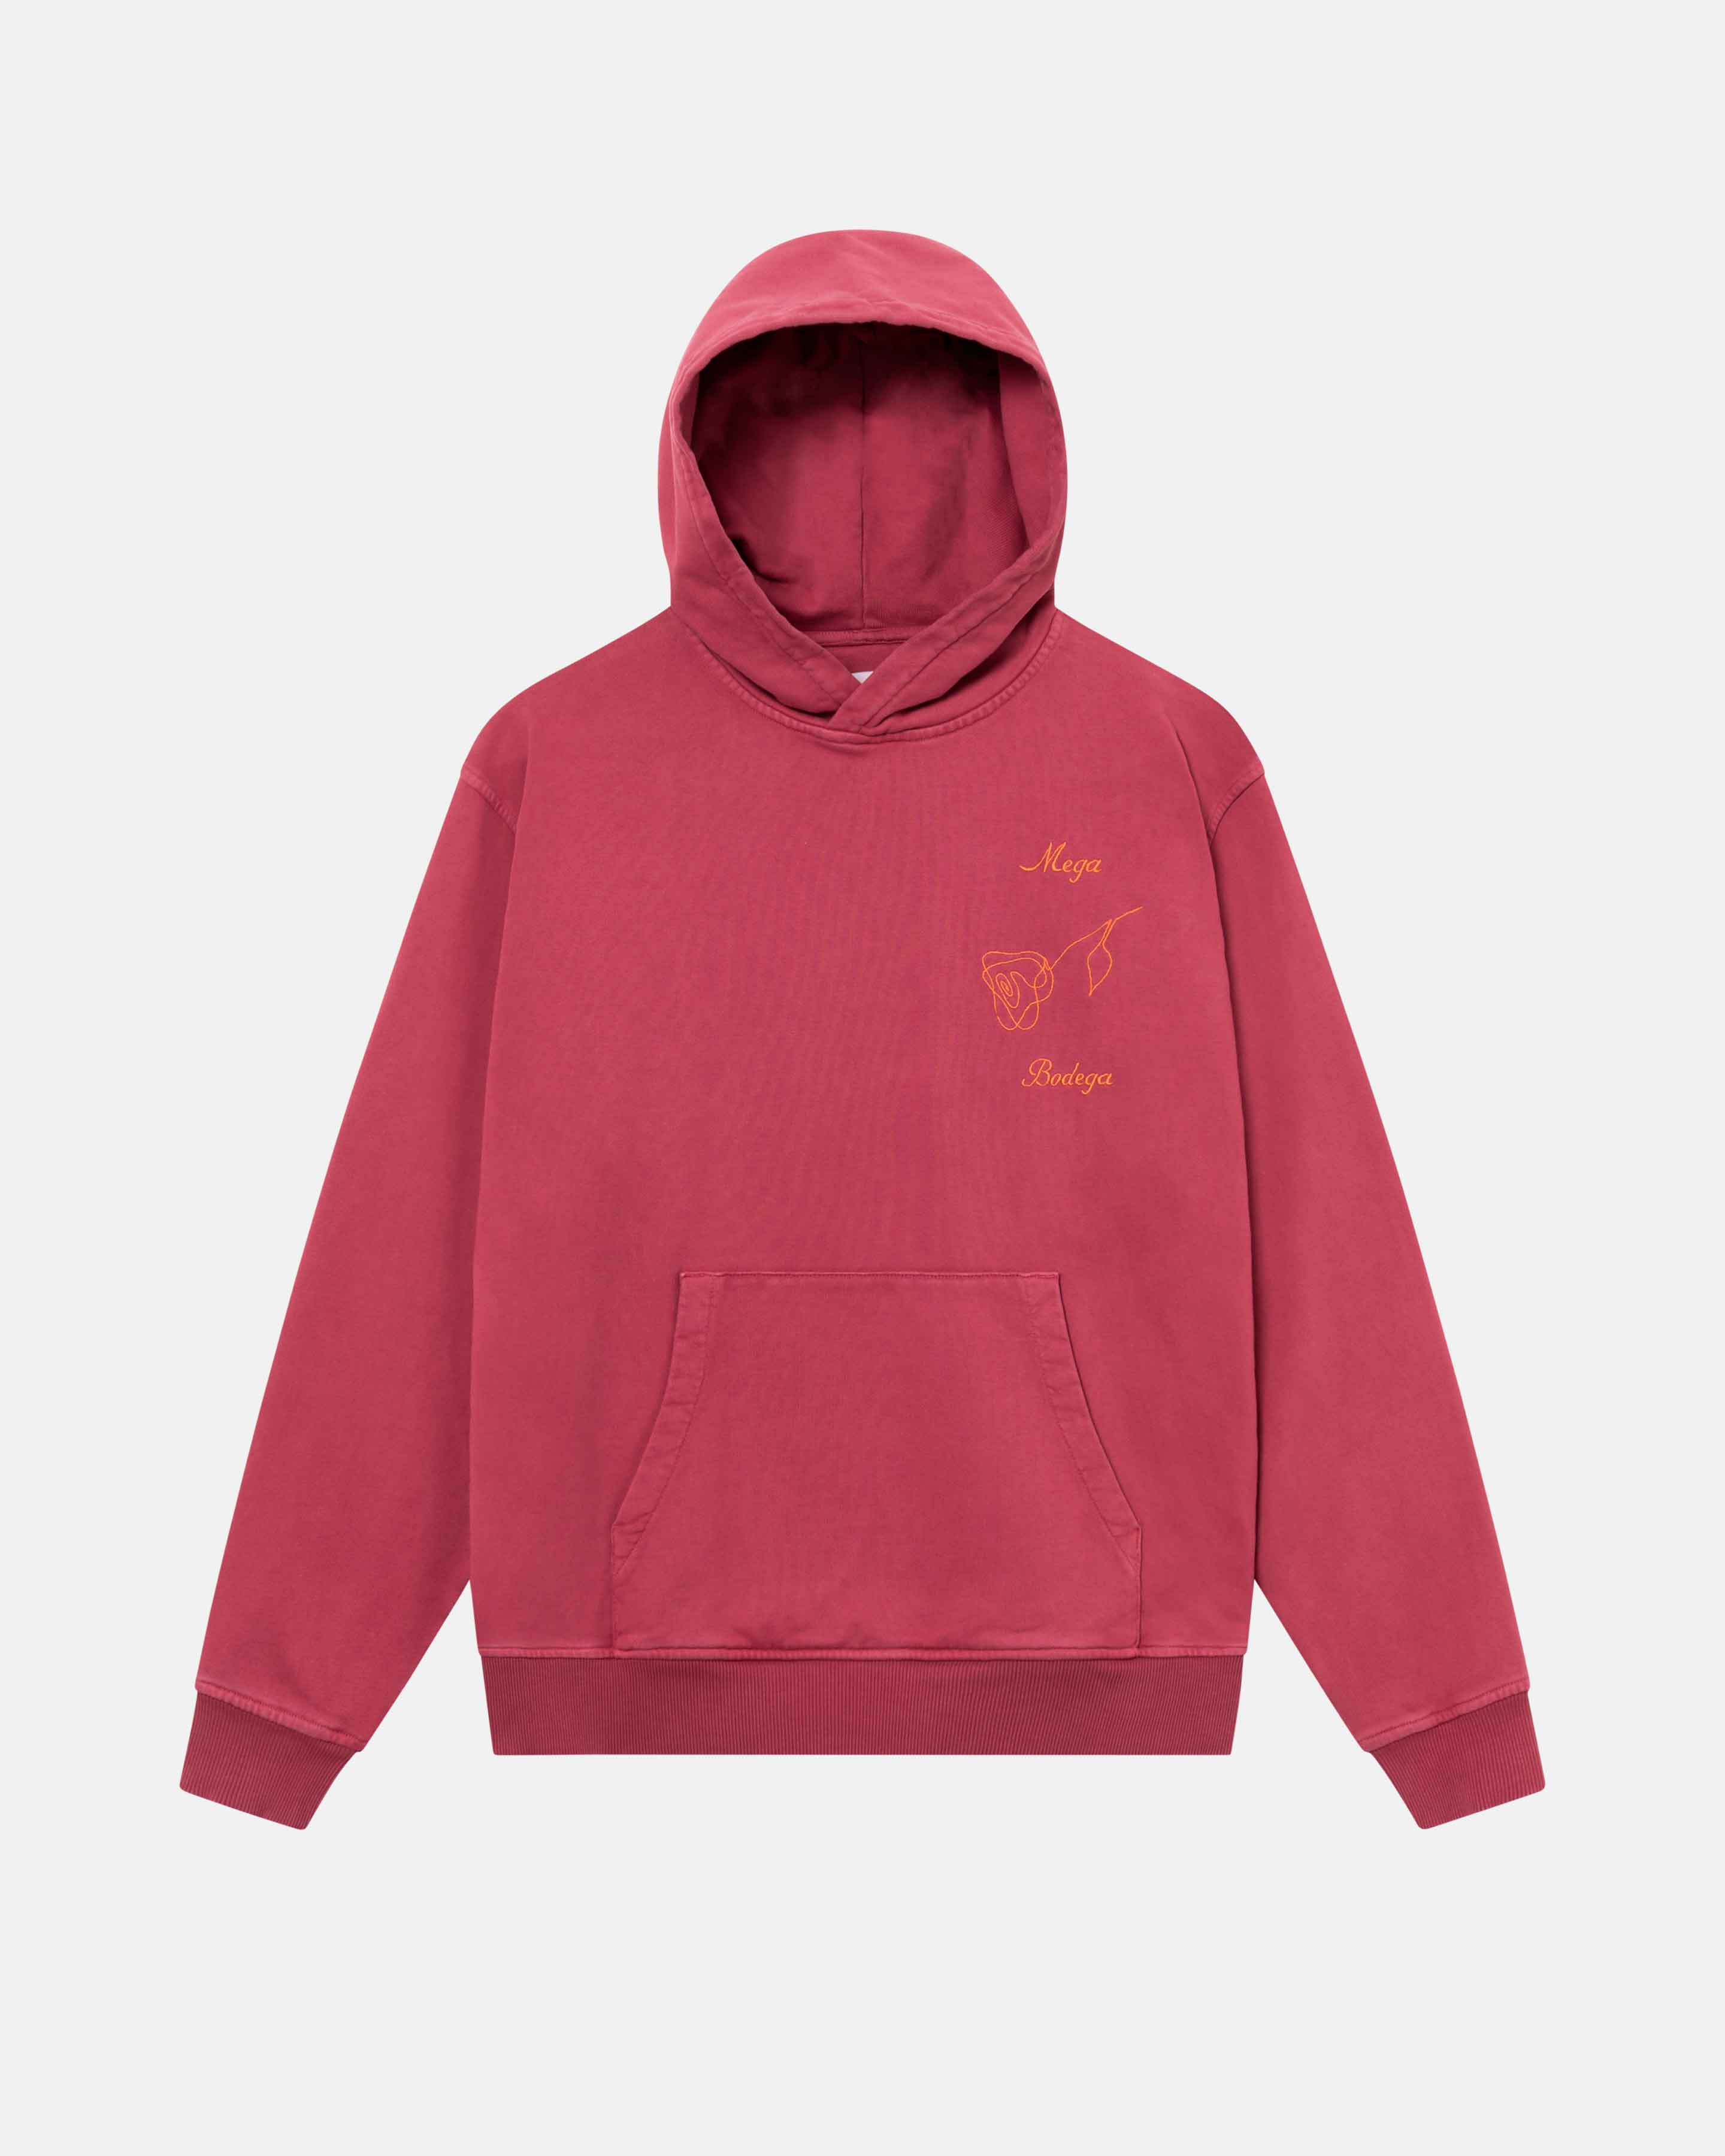 A burgundy hoodie with orange chest embroidery